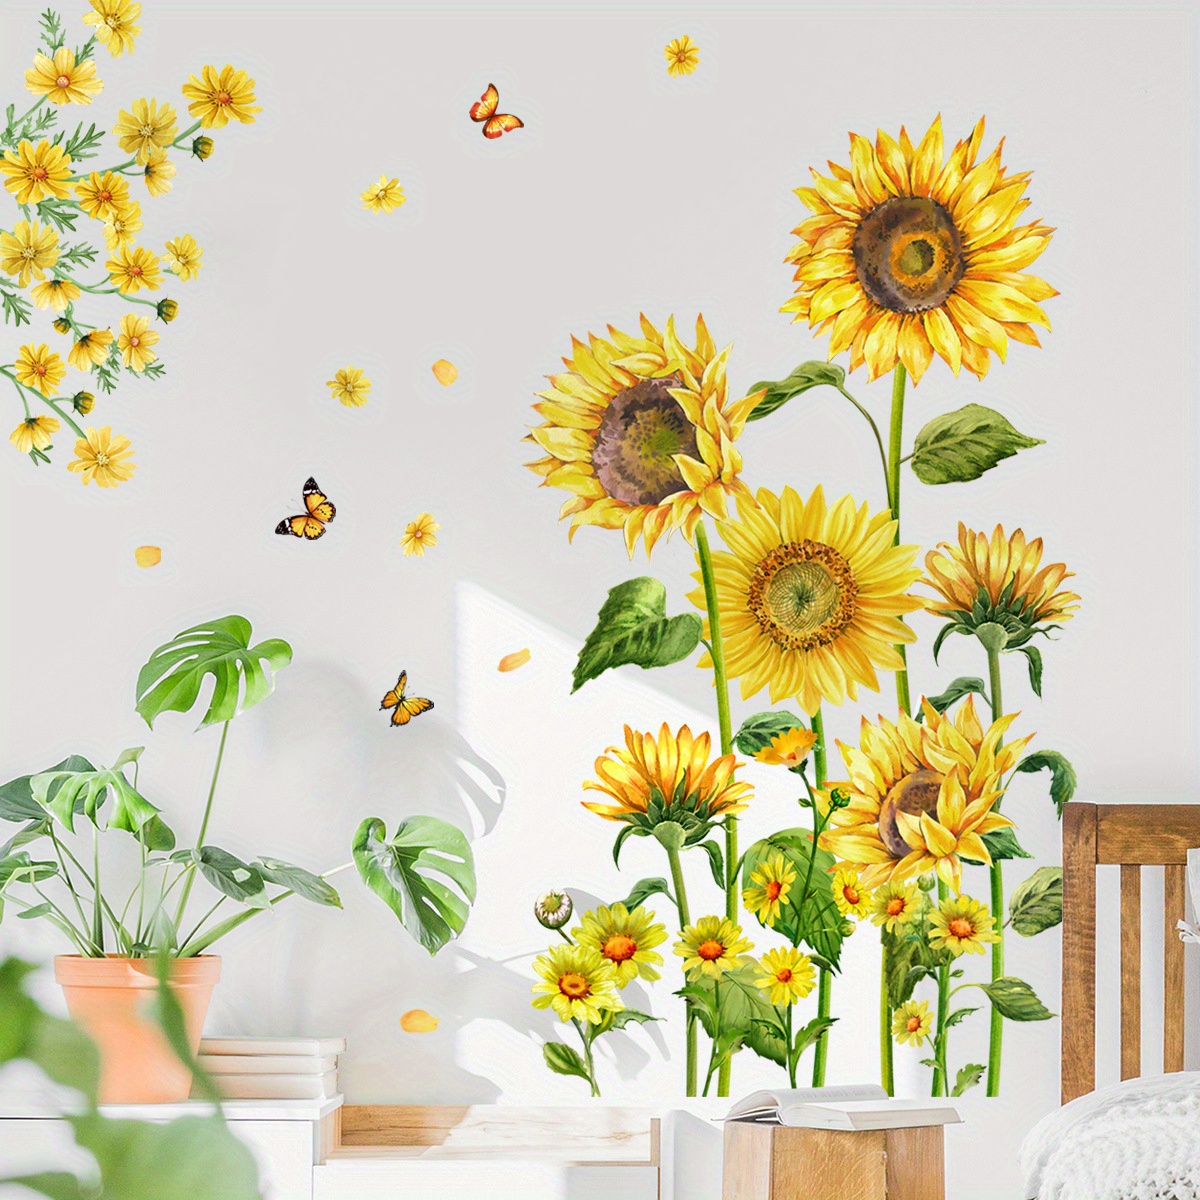 

Sunflower Wall Decals With Butterflies - Contemporary Style Pvc Removable Stickers For Living Room & Bedroom Decor, 1 Pack